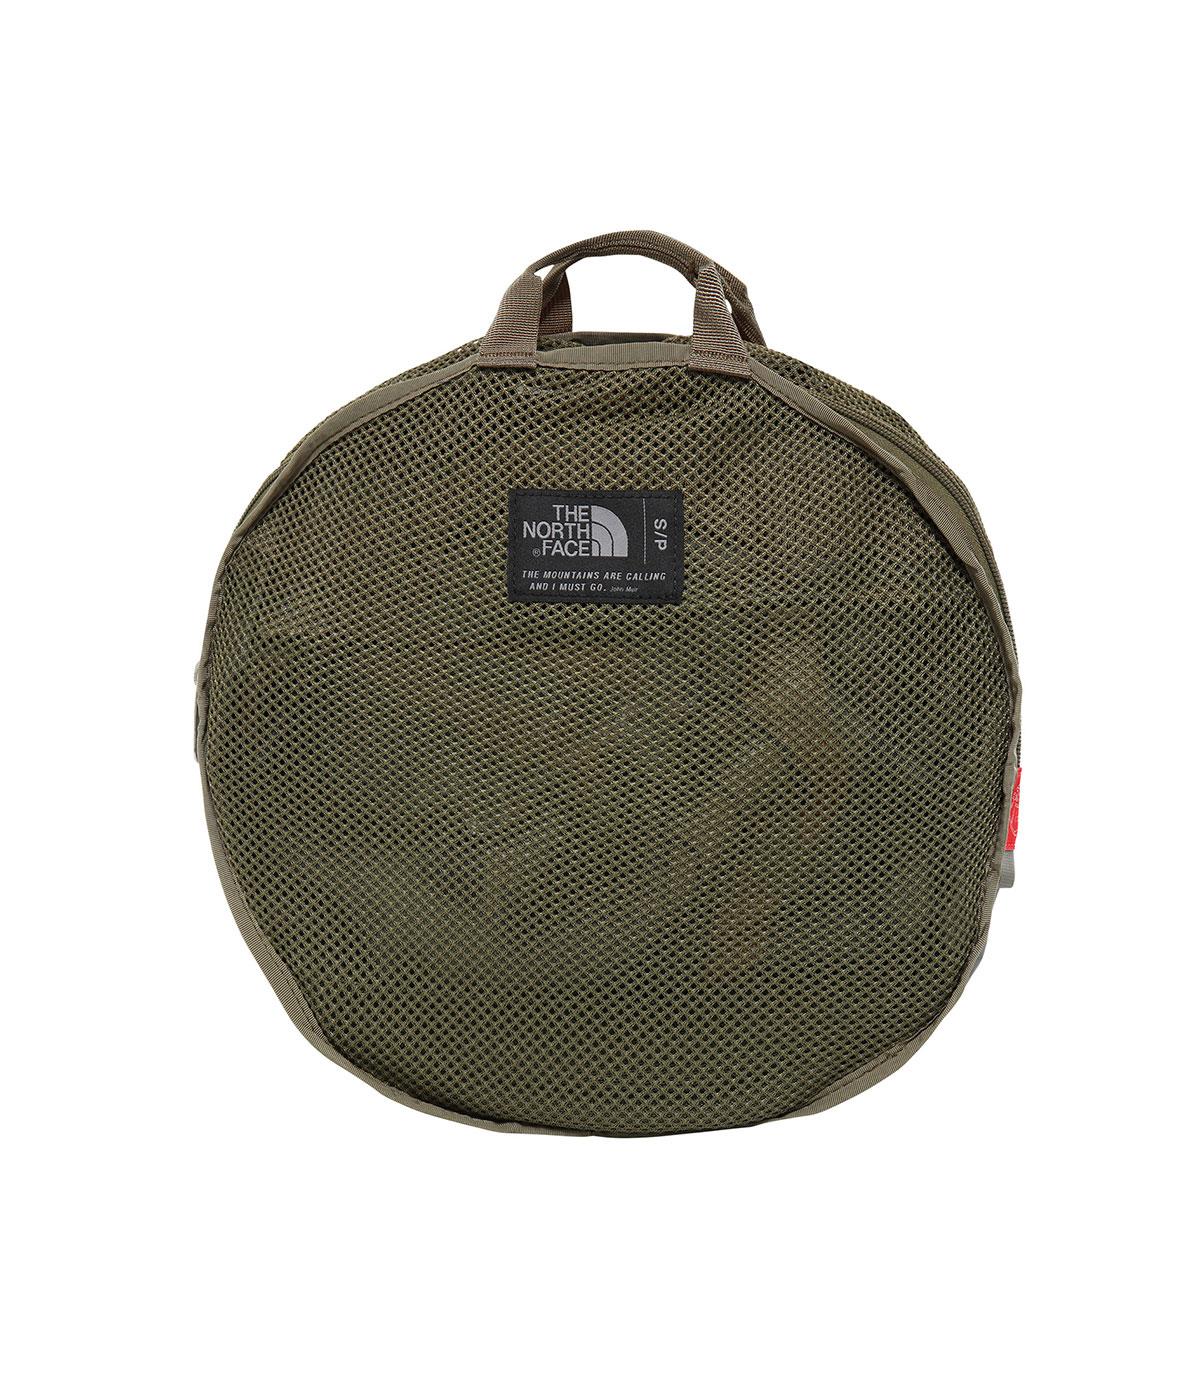  The North Face Base Camp Duffel - S Nf0A3Etog2G1